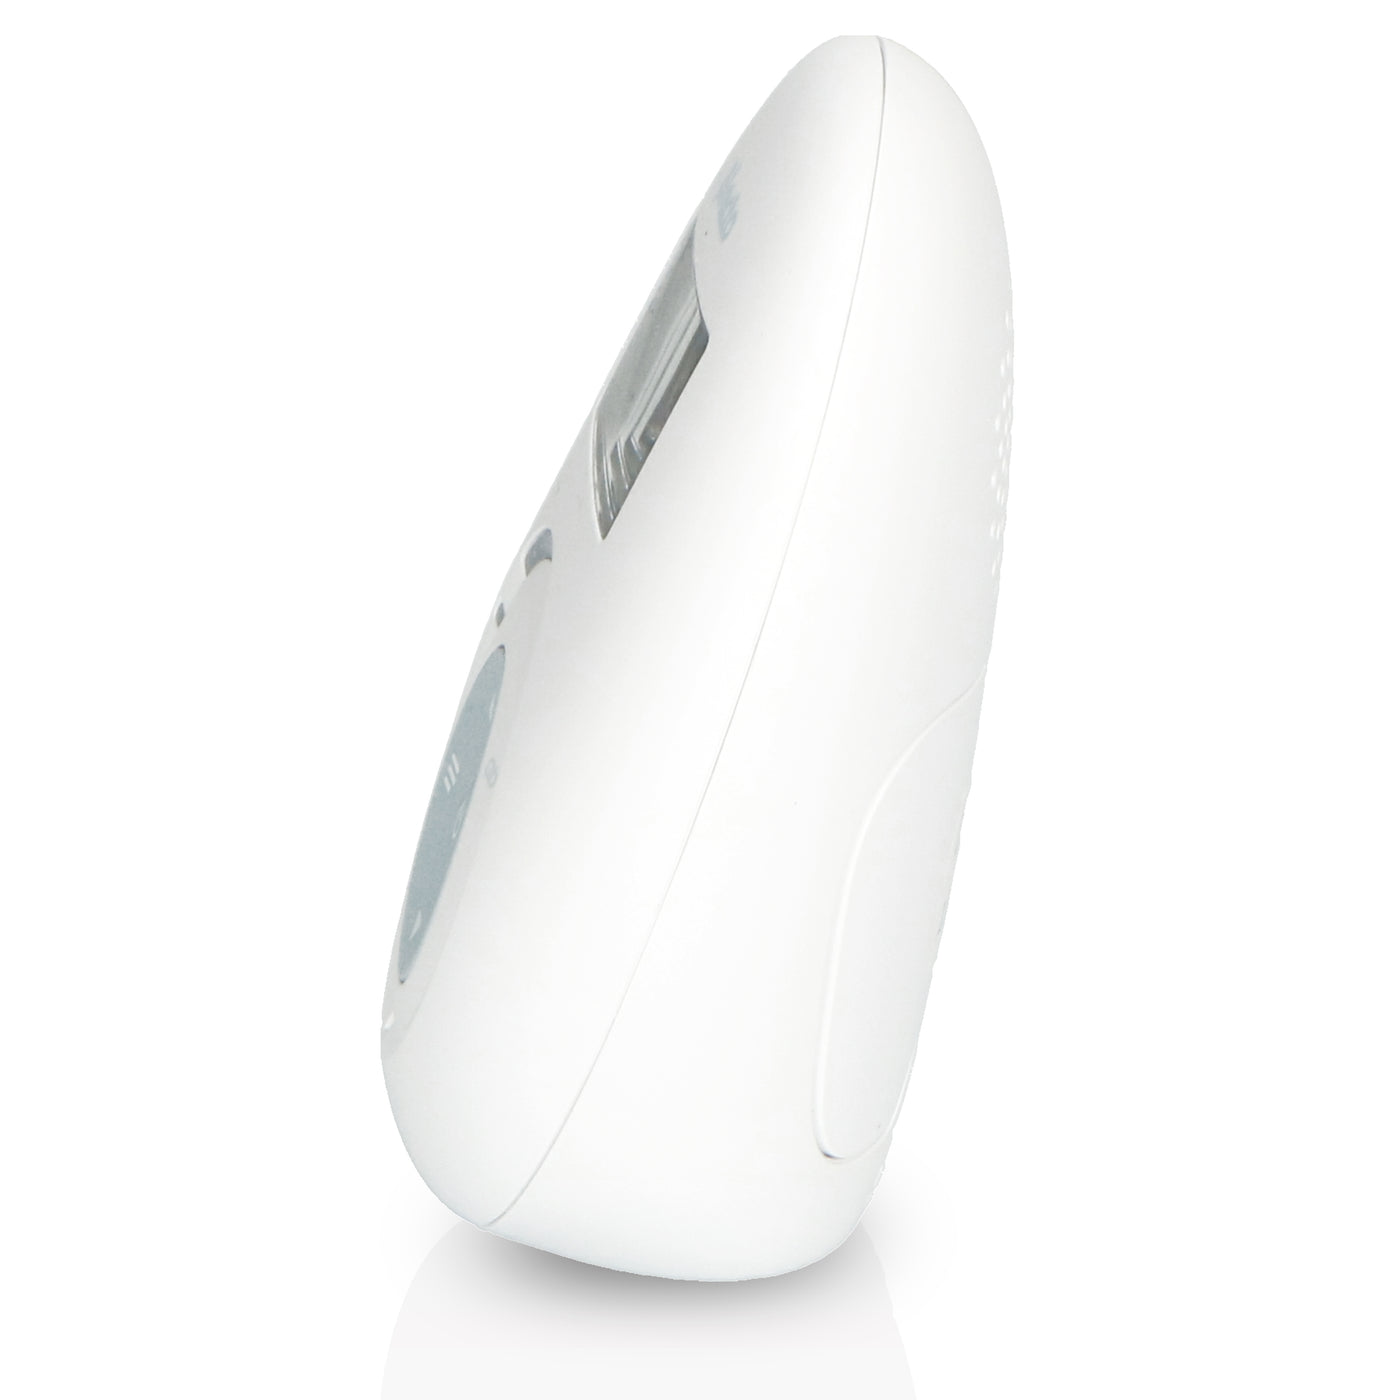 Alecto DBX120 - Full Eco DECT baby monitor, white/blue